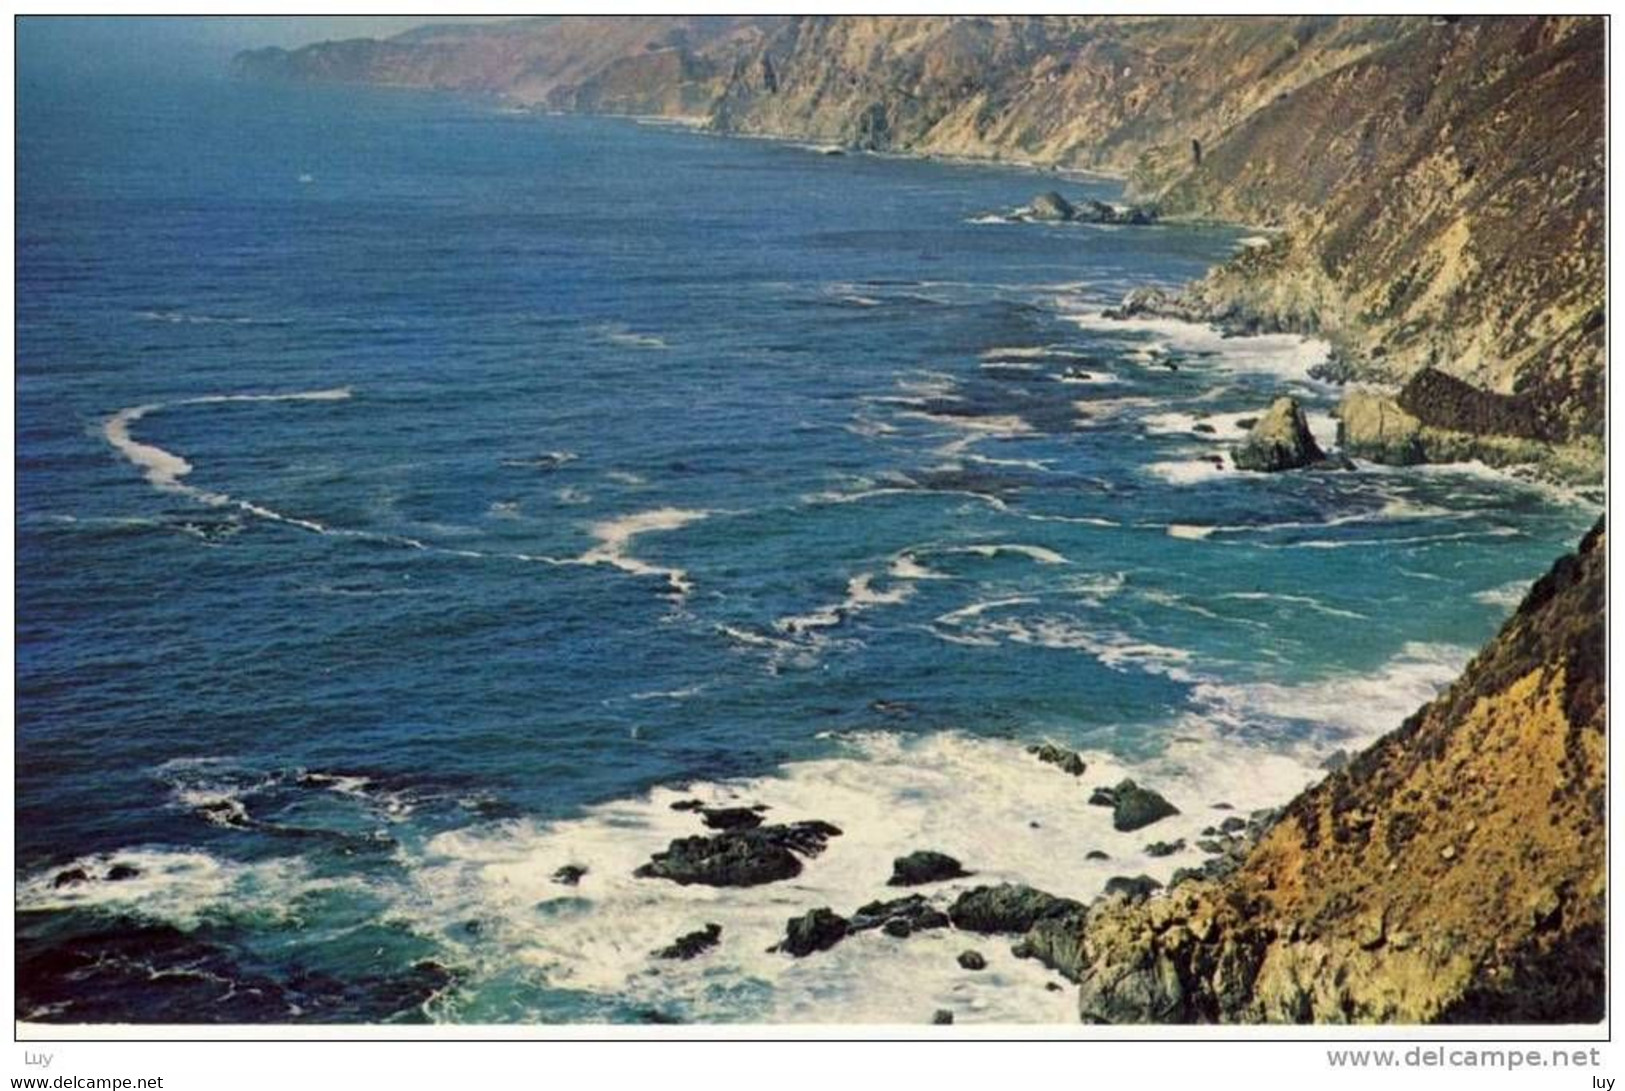 BIG SUR Point - Swirling Surf Along Highway 1 - Showing The Highway Built On The High Cliffs. - American Roadside